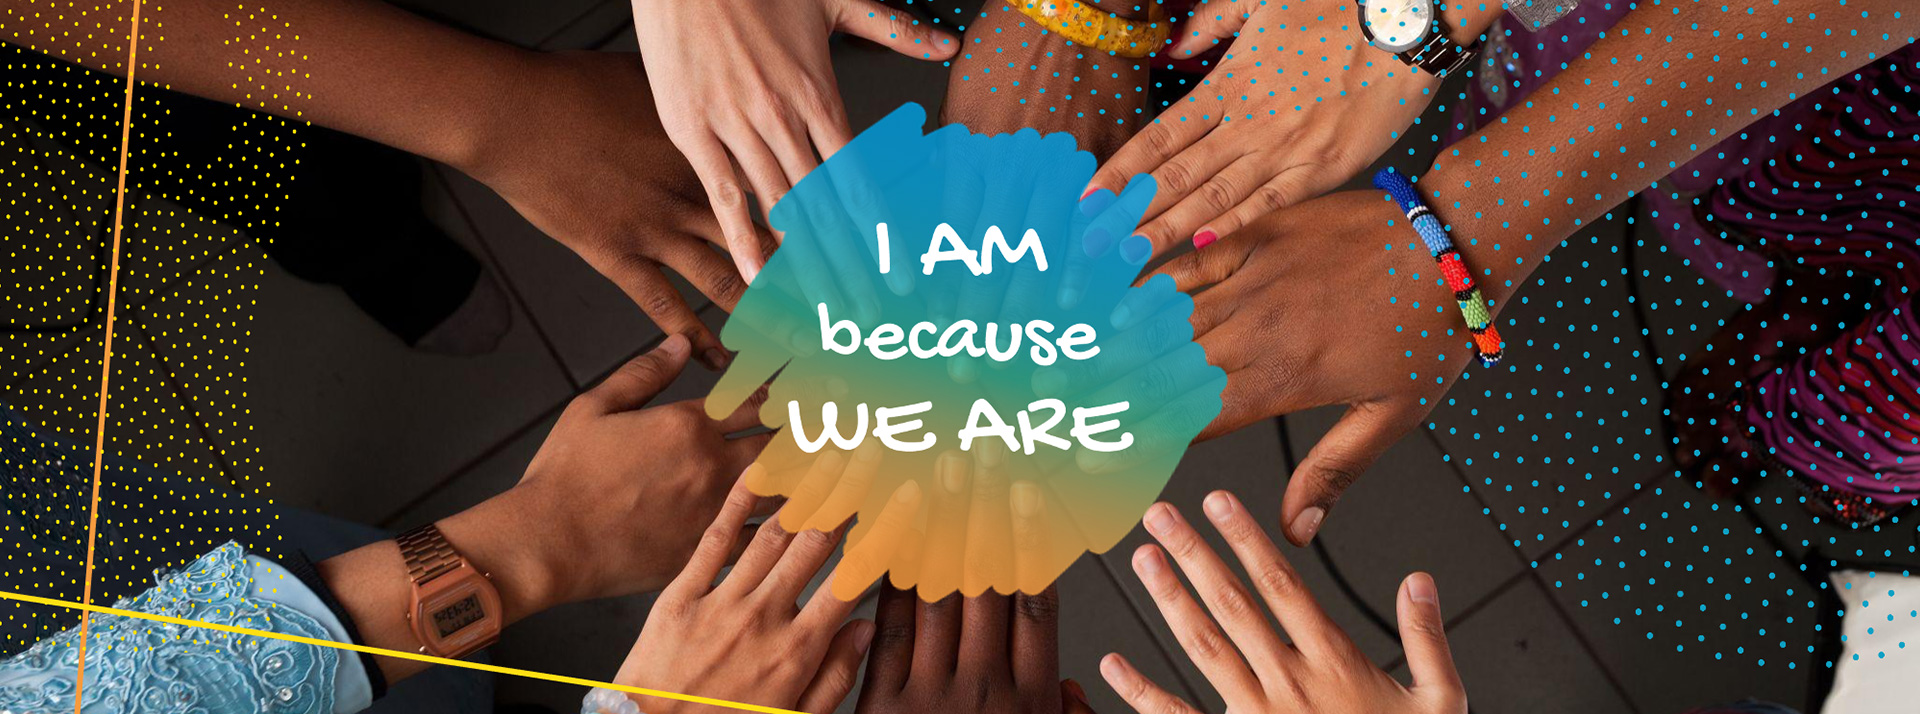 I am because we are